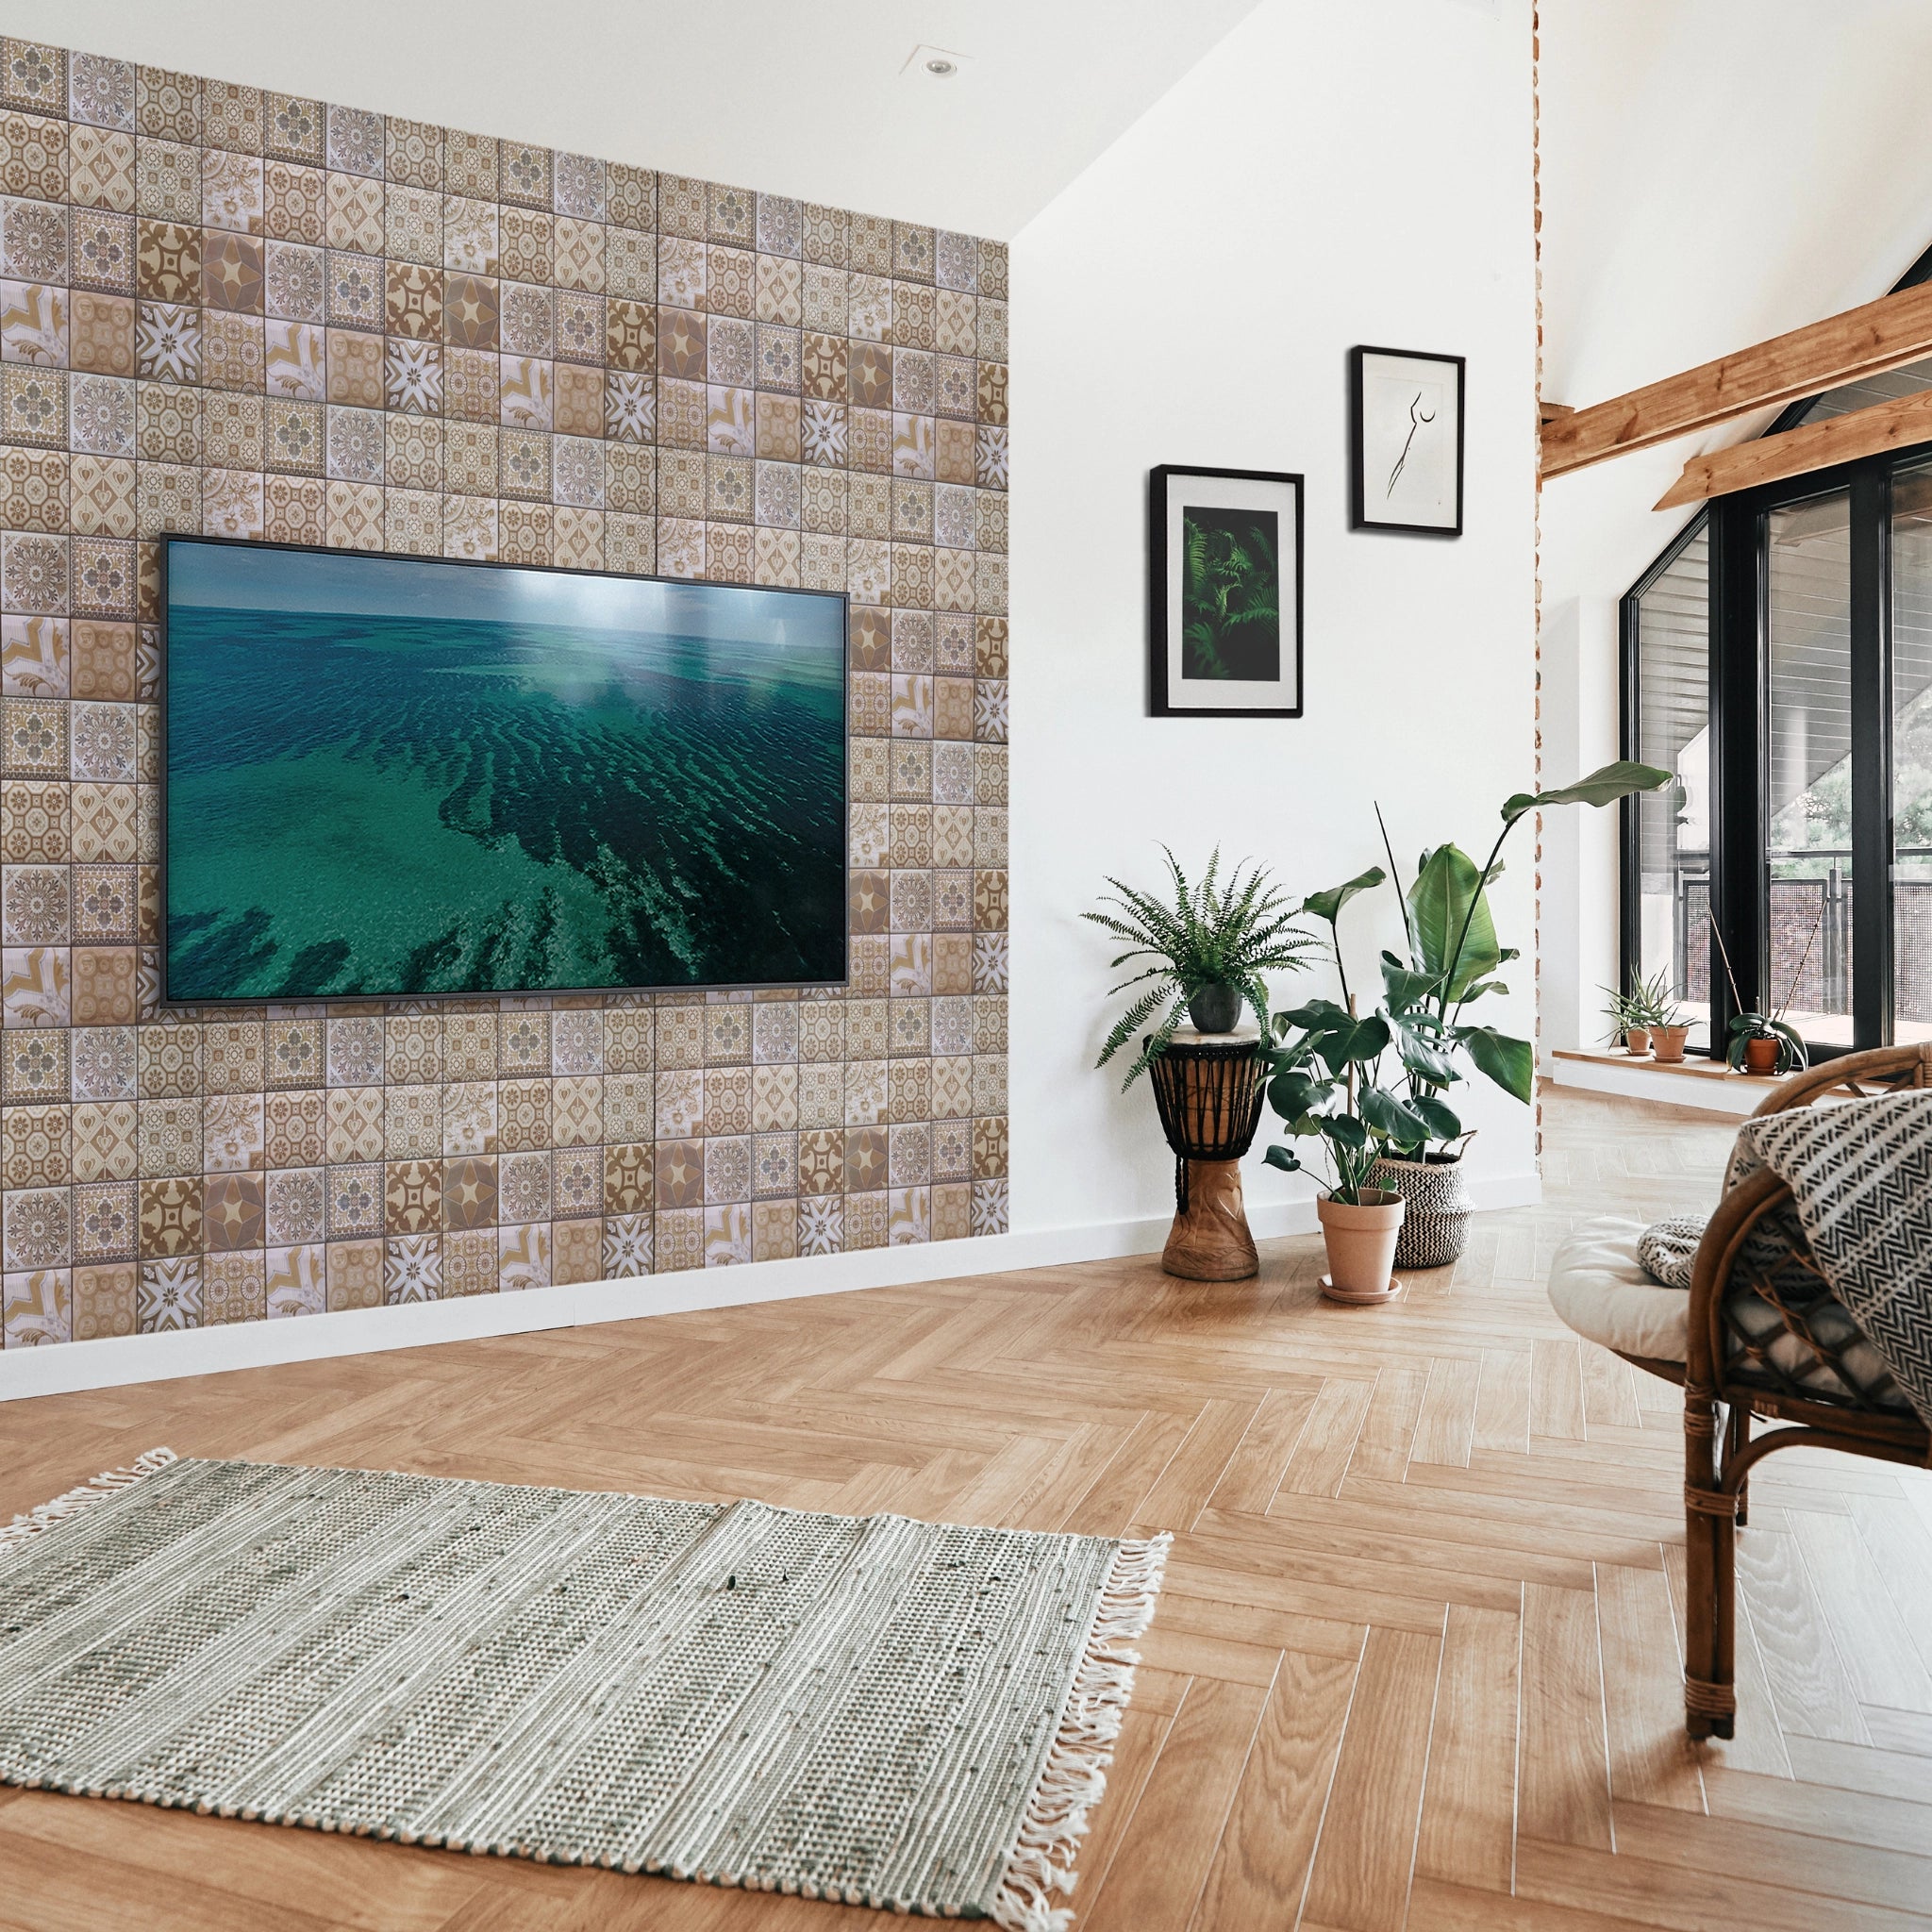 Modern living room with brown wall panel featuring geometric patterns